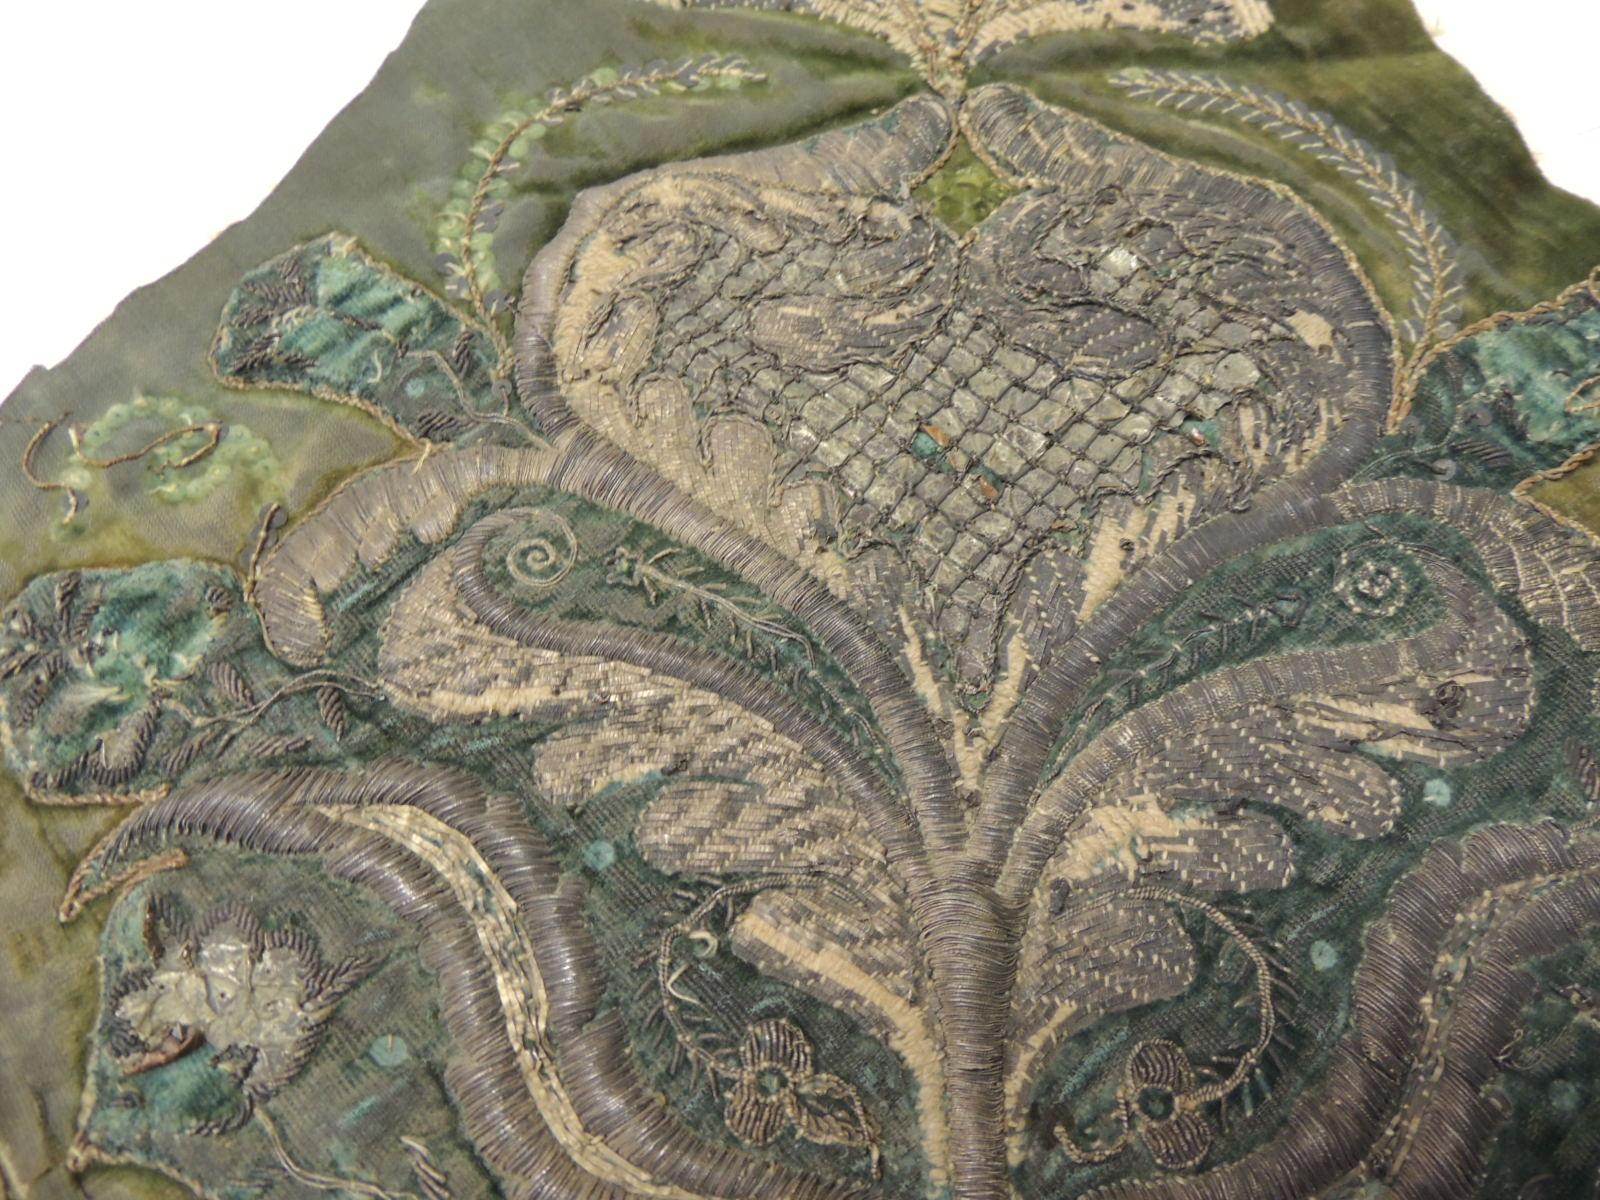 Antique Textile Collection:
19th Century Persian Embroidered Flower on Silk Textile, applique, hand work including silver metallic threads, twisted copper wires
and sequences. Embroidery was applied on to green silk velvet.
Could be great to cut out